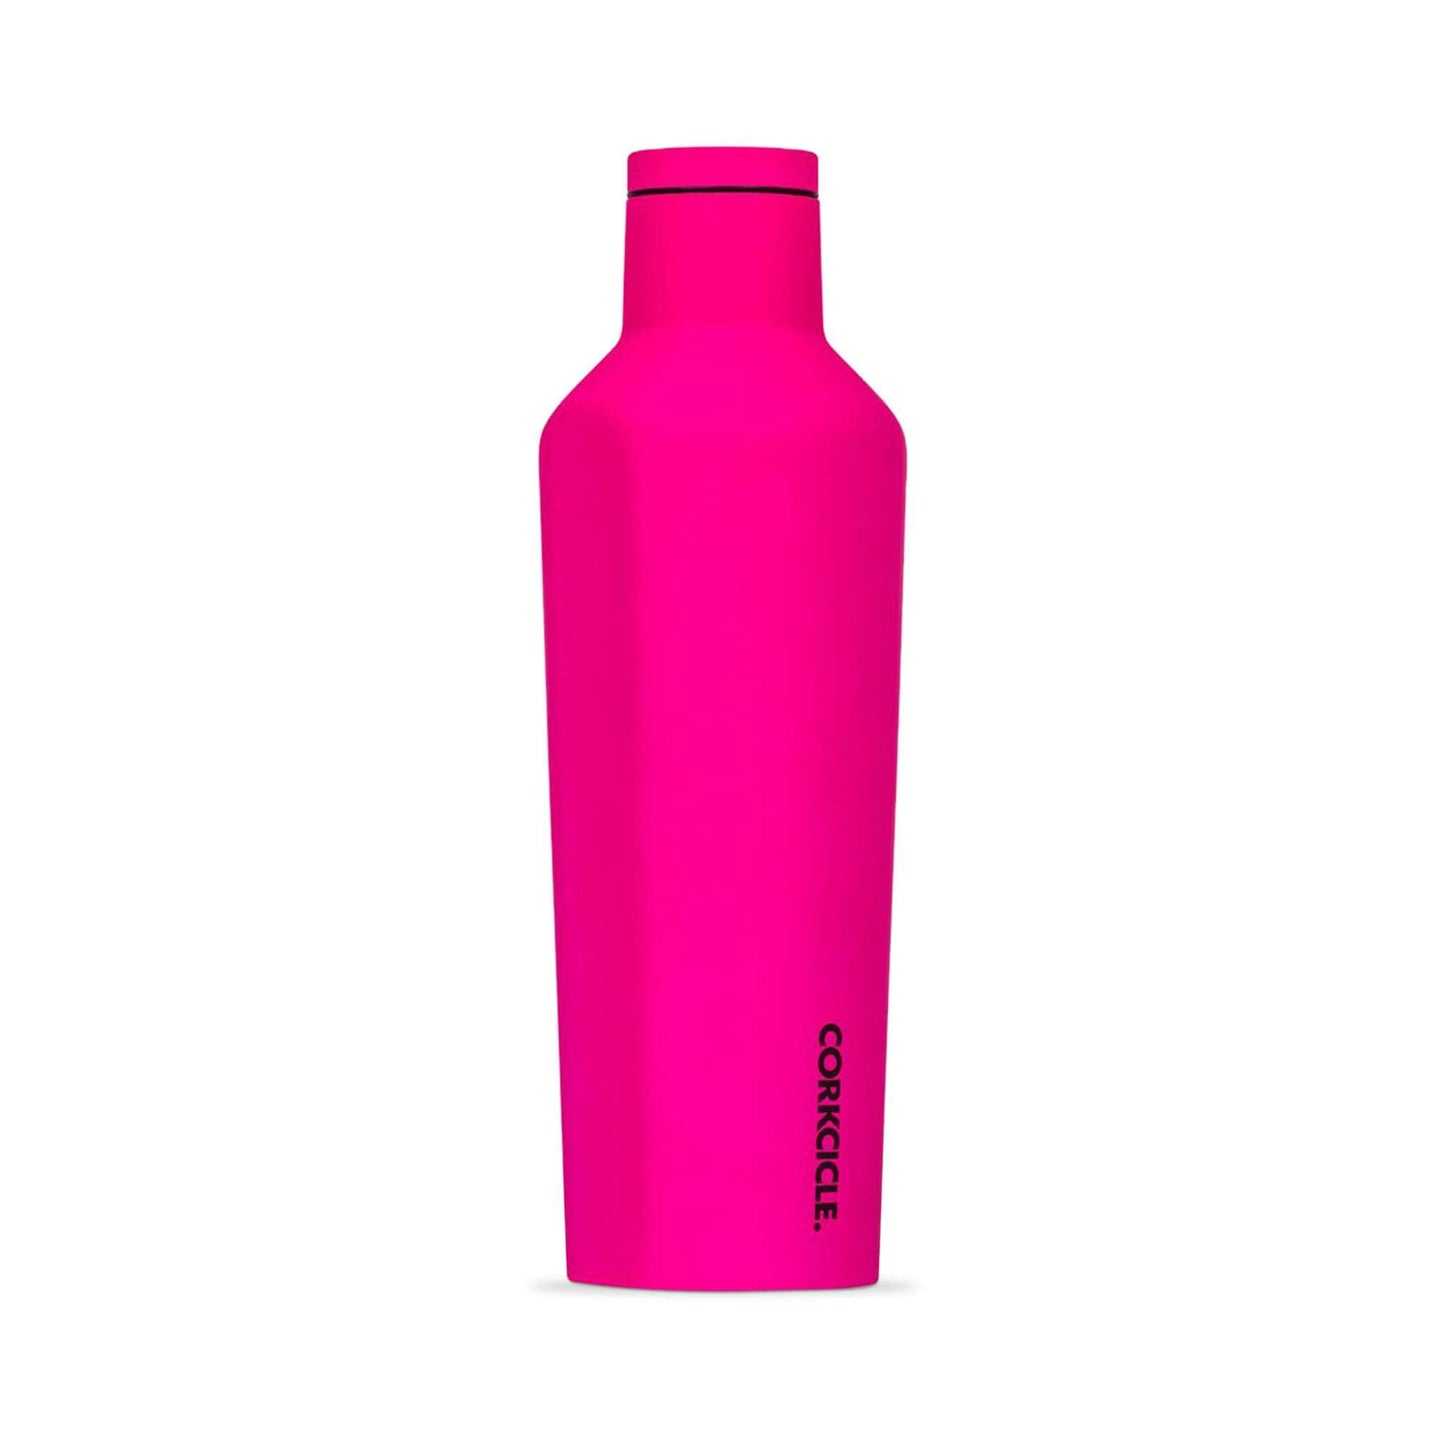 Corkcicle Water Bottles Neon Pink 16oz/475ml Corkcicle Canteen - Insulated Bottle - Neon Lights Collection